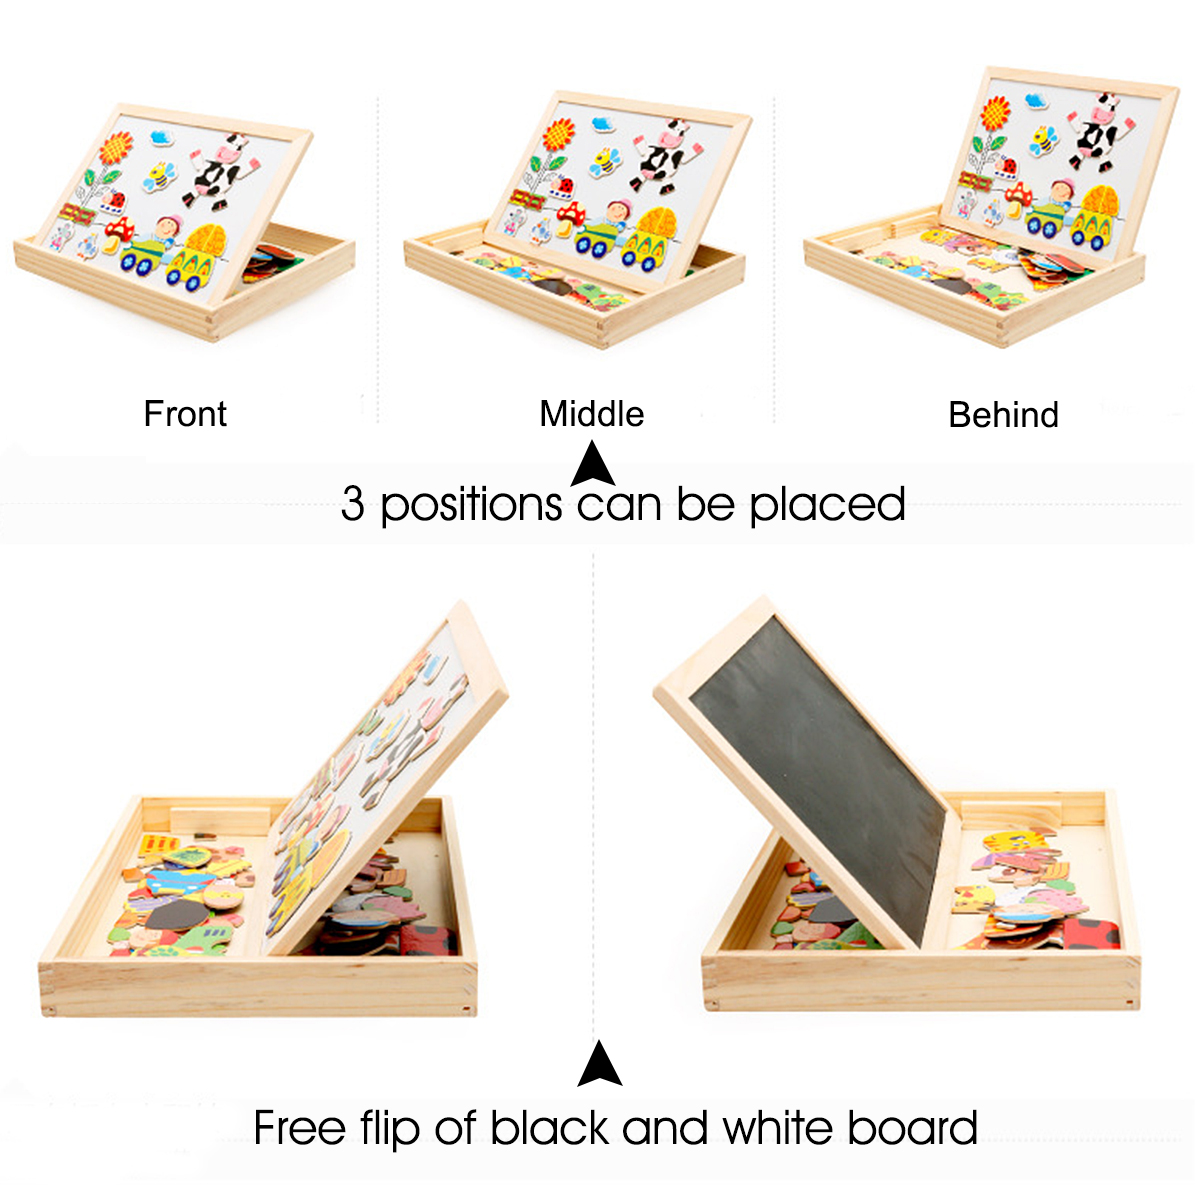 Wooden-DIY-Magnetic-Drawing-Board-Forest-Paradise-Childrens-Early-Educational-Learning-Toys-1676971-10